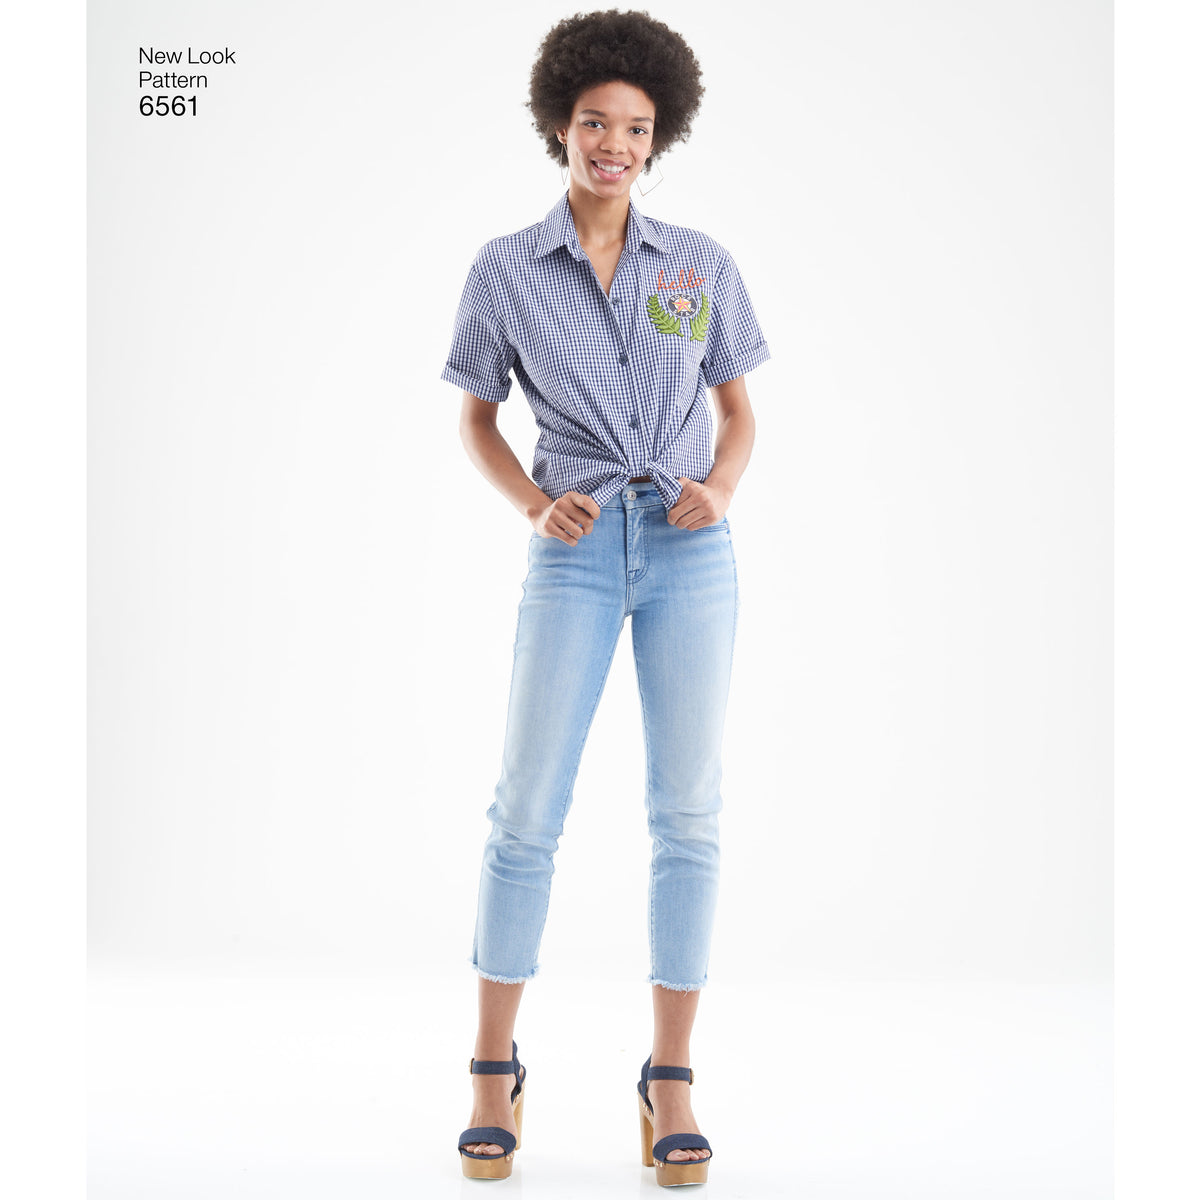 6561 New Look Pattern 6561 Women's Shirts in Three Lengths